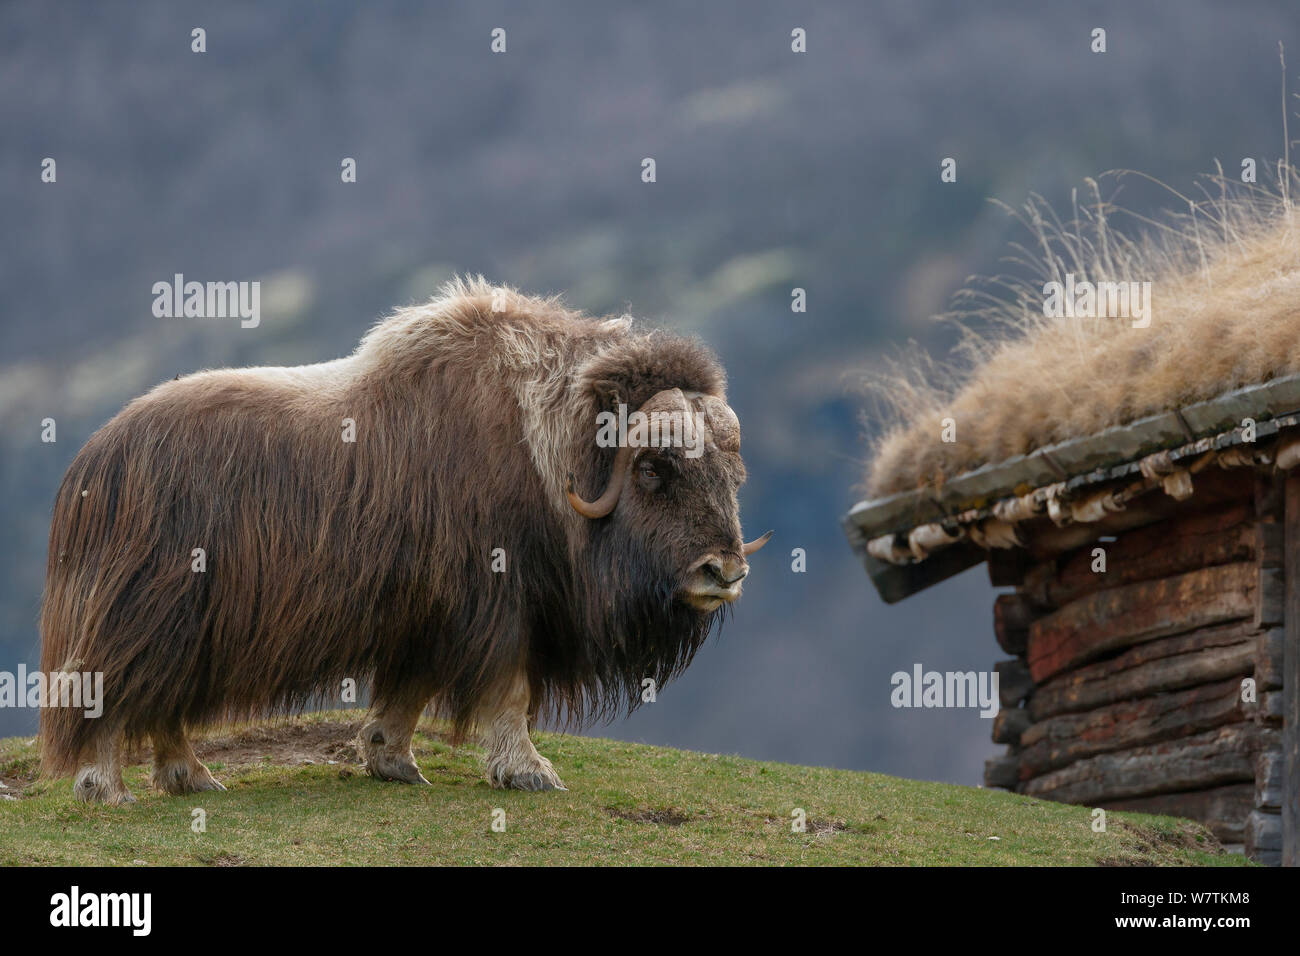 Male Muskox (Ovibos moschatus) standing near an old grass roofed barn. Dovrefjell National Park, Norway. May. Stock Photo